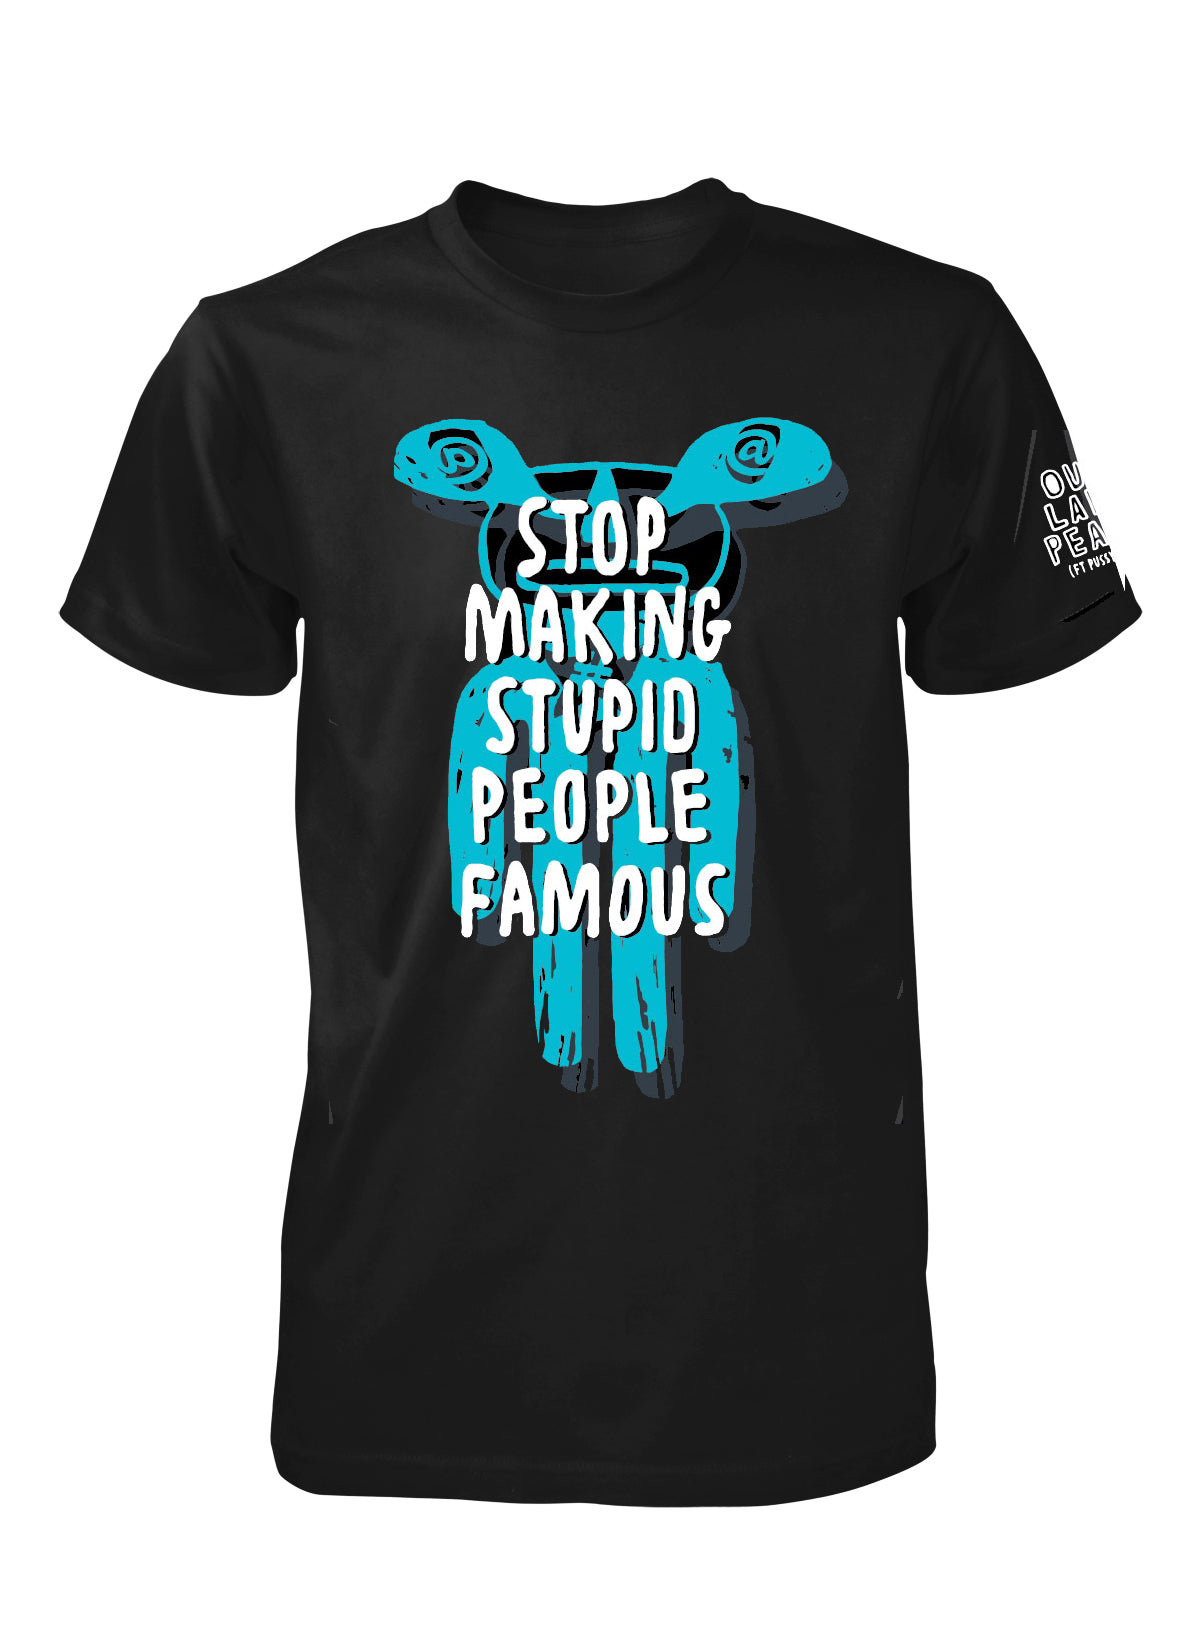 STOP MAKING STUPID PEOPLE FAMOUS T-SHIRT